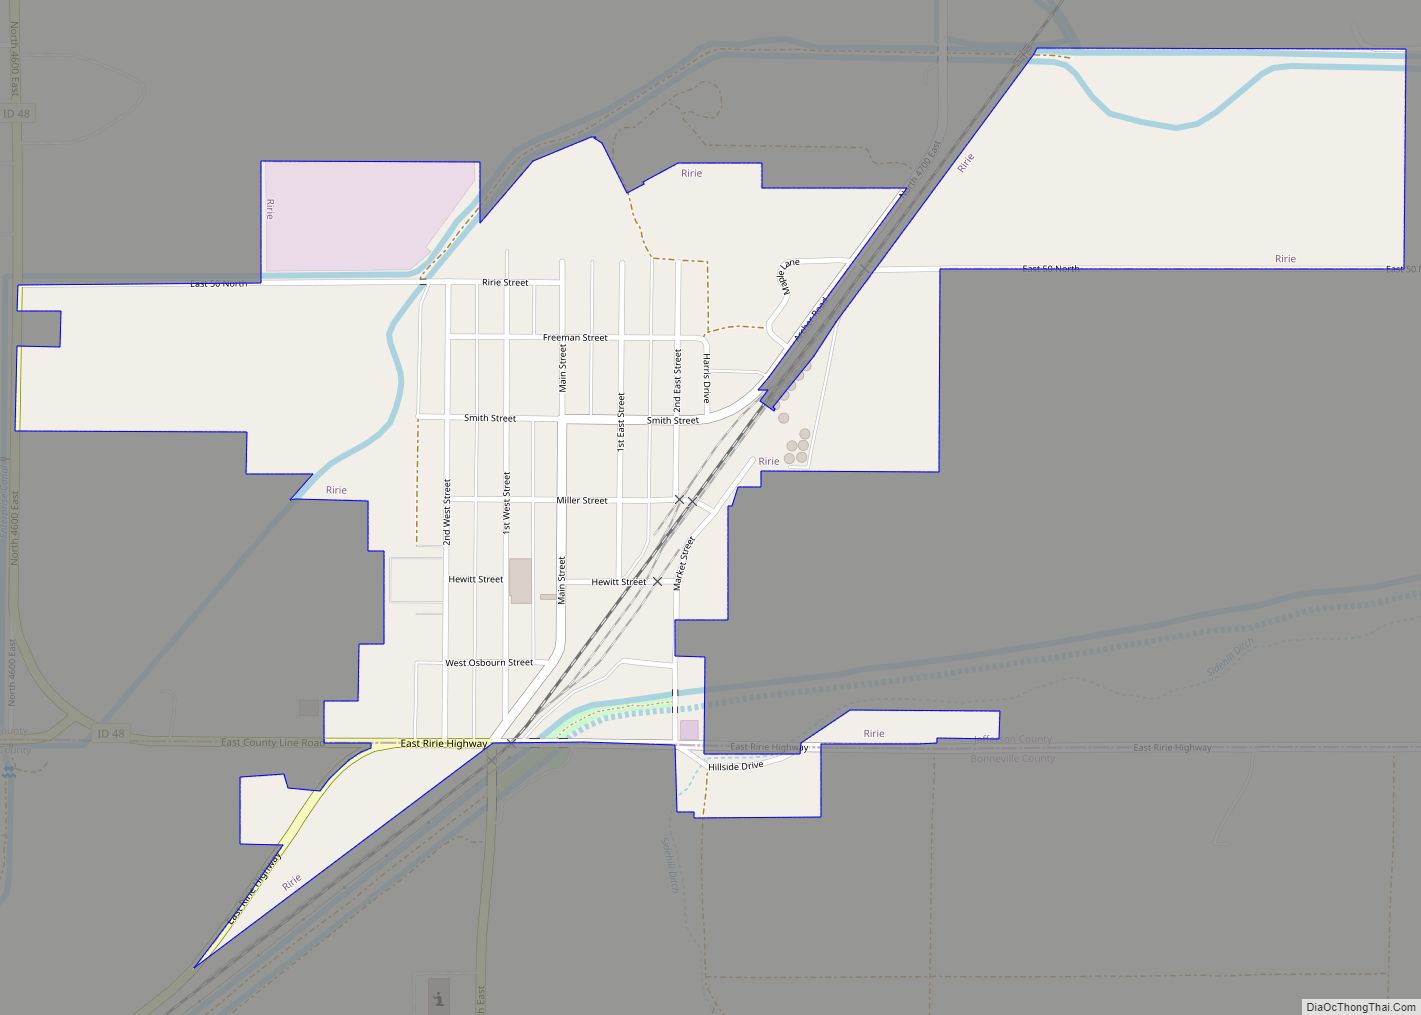 Map of Ririe city